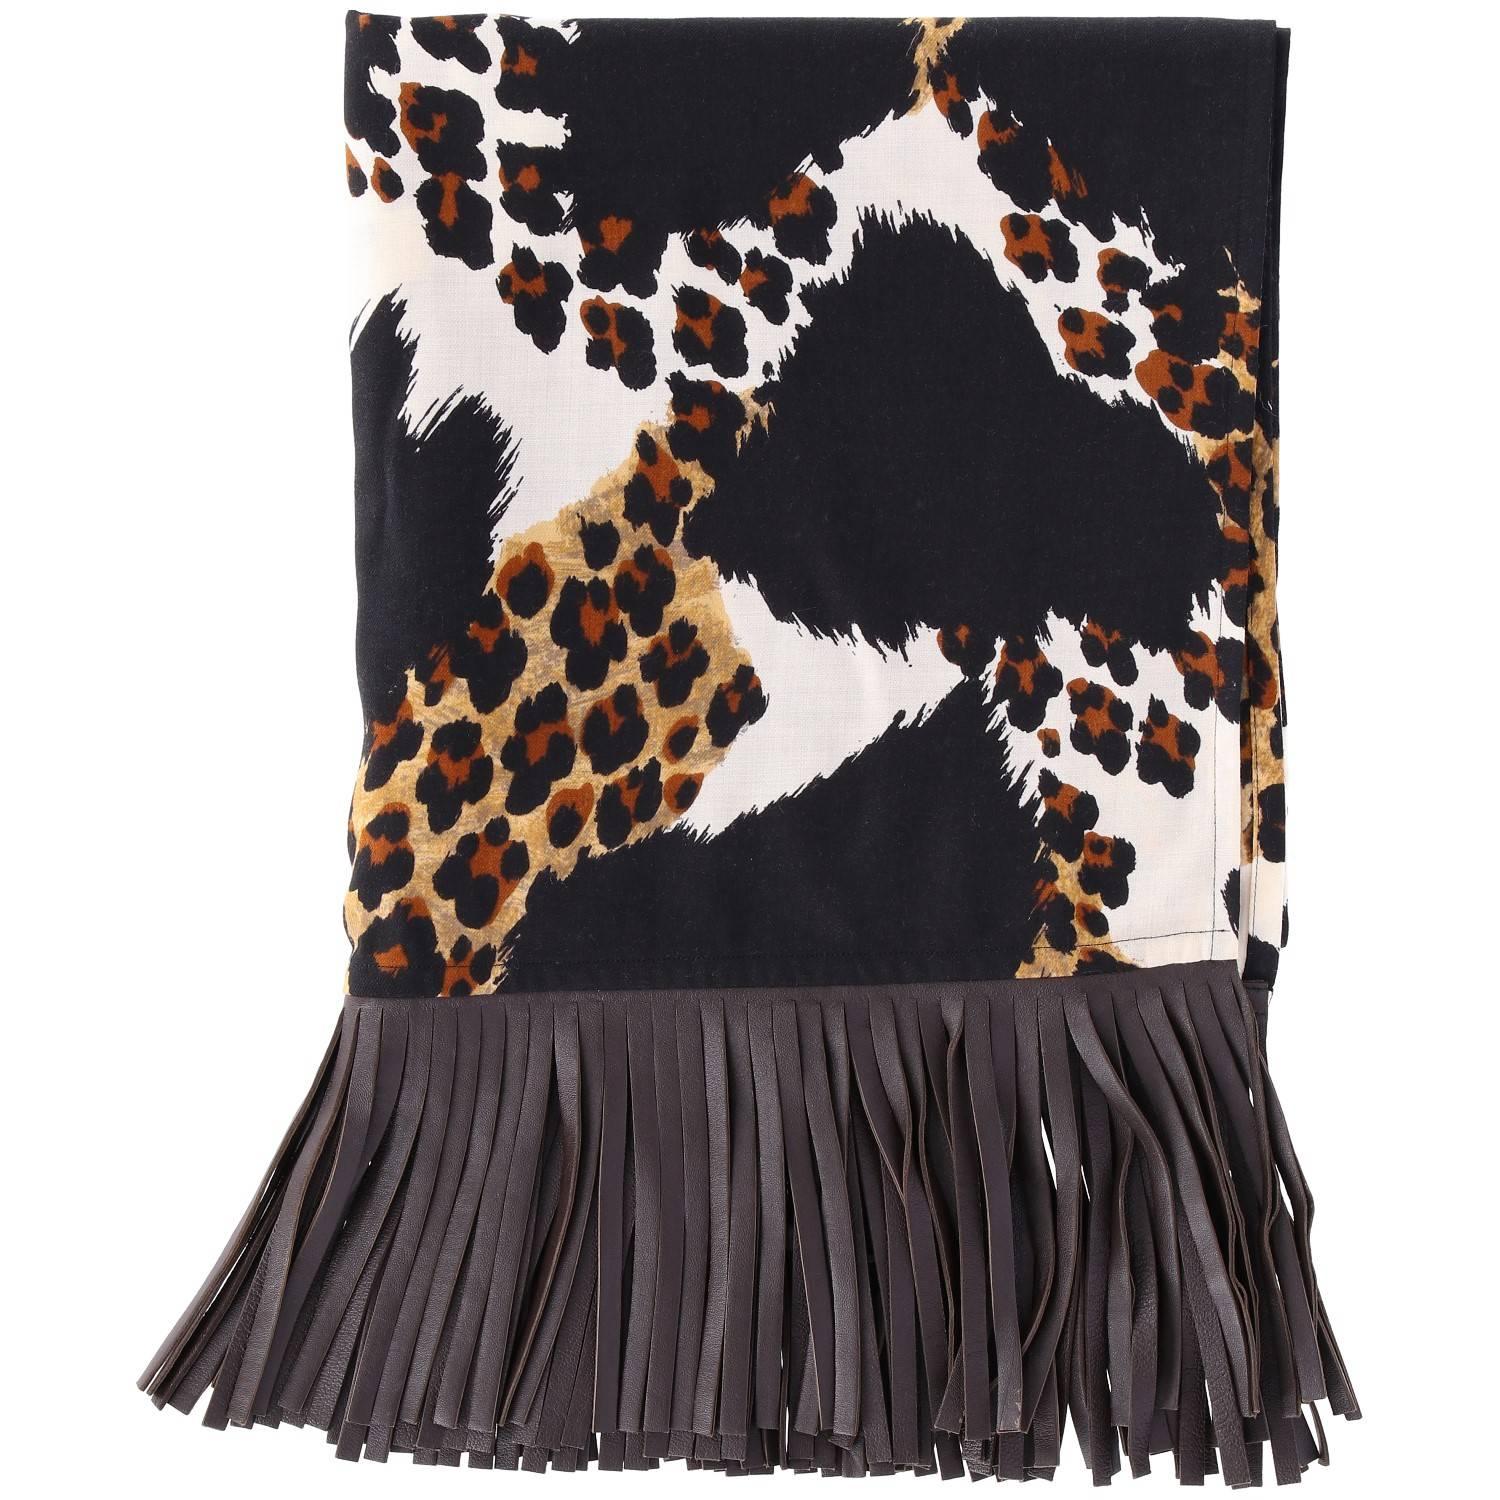 Fashionable Yves Saint Laurent black wool scarf, with multicolor animal print and dark brown leather fringed edges. The item is vintage, it was produced in the 80s and is in excellent conditions.

Scarf length: 280 cm
Fringes length: 15 cm
Width: 61